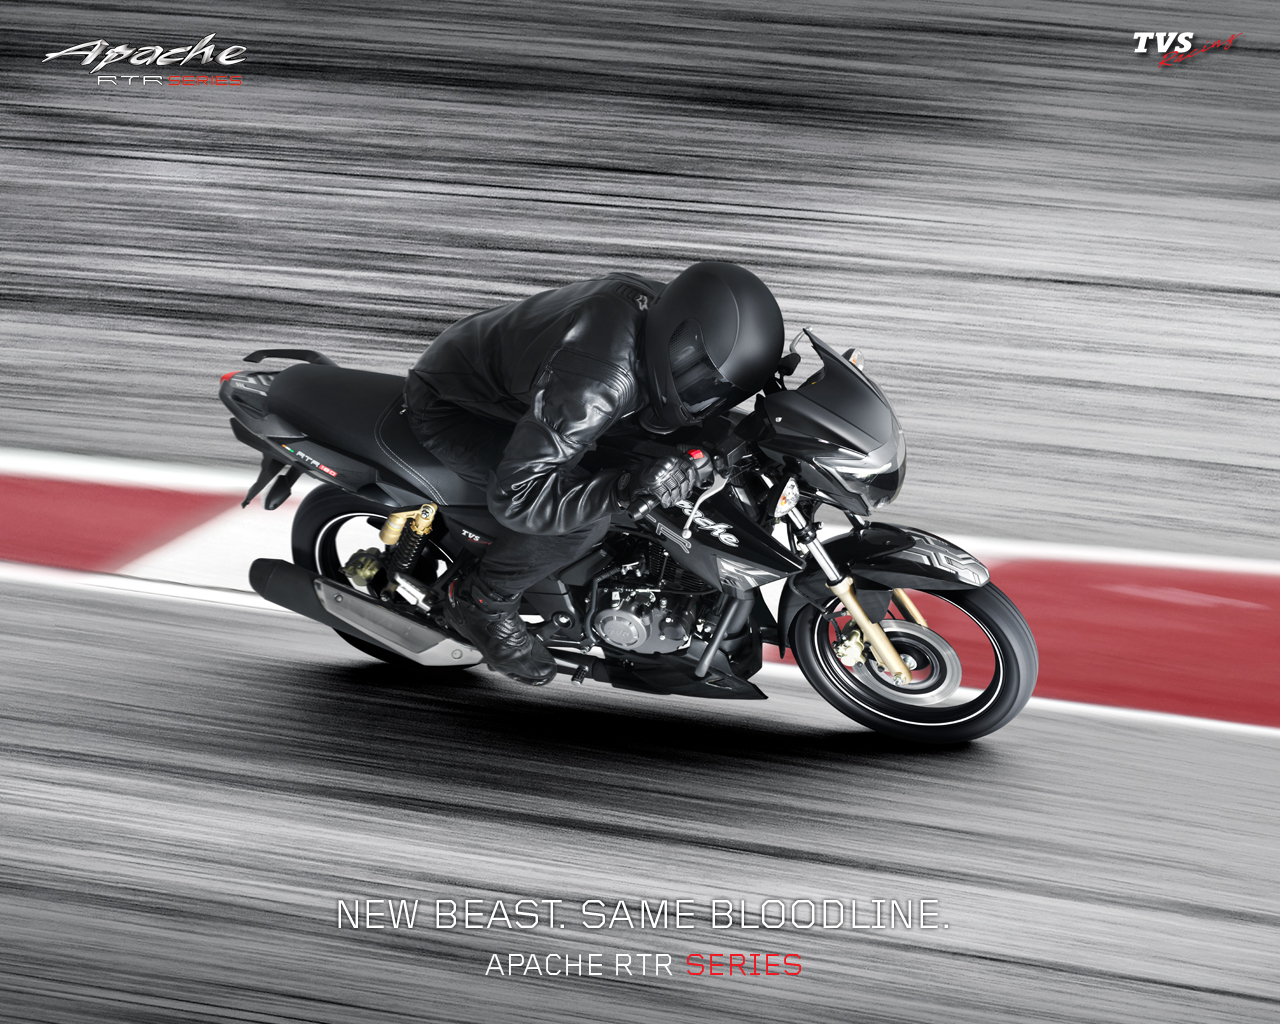 Tvs Apache Rtr Image Wallpaper And Photos